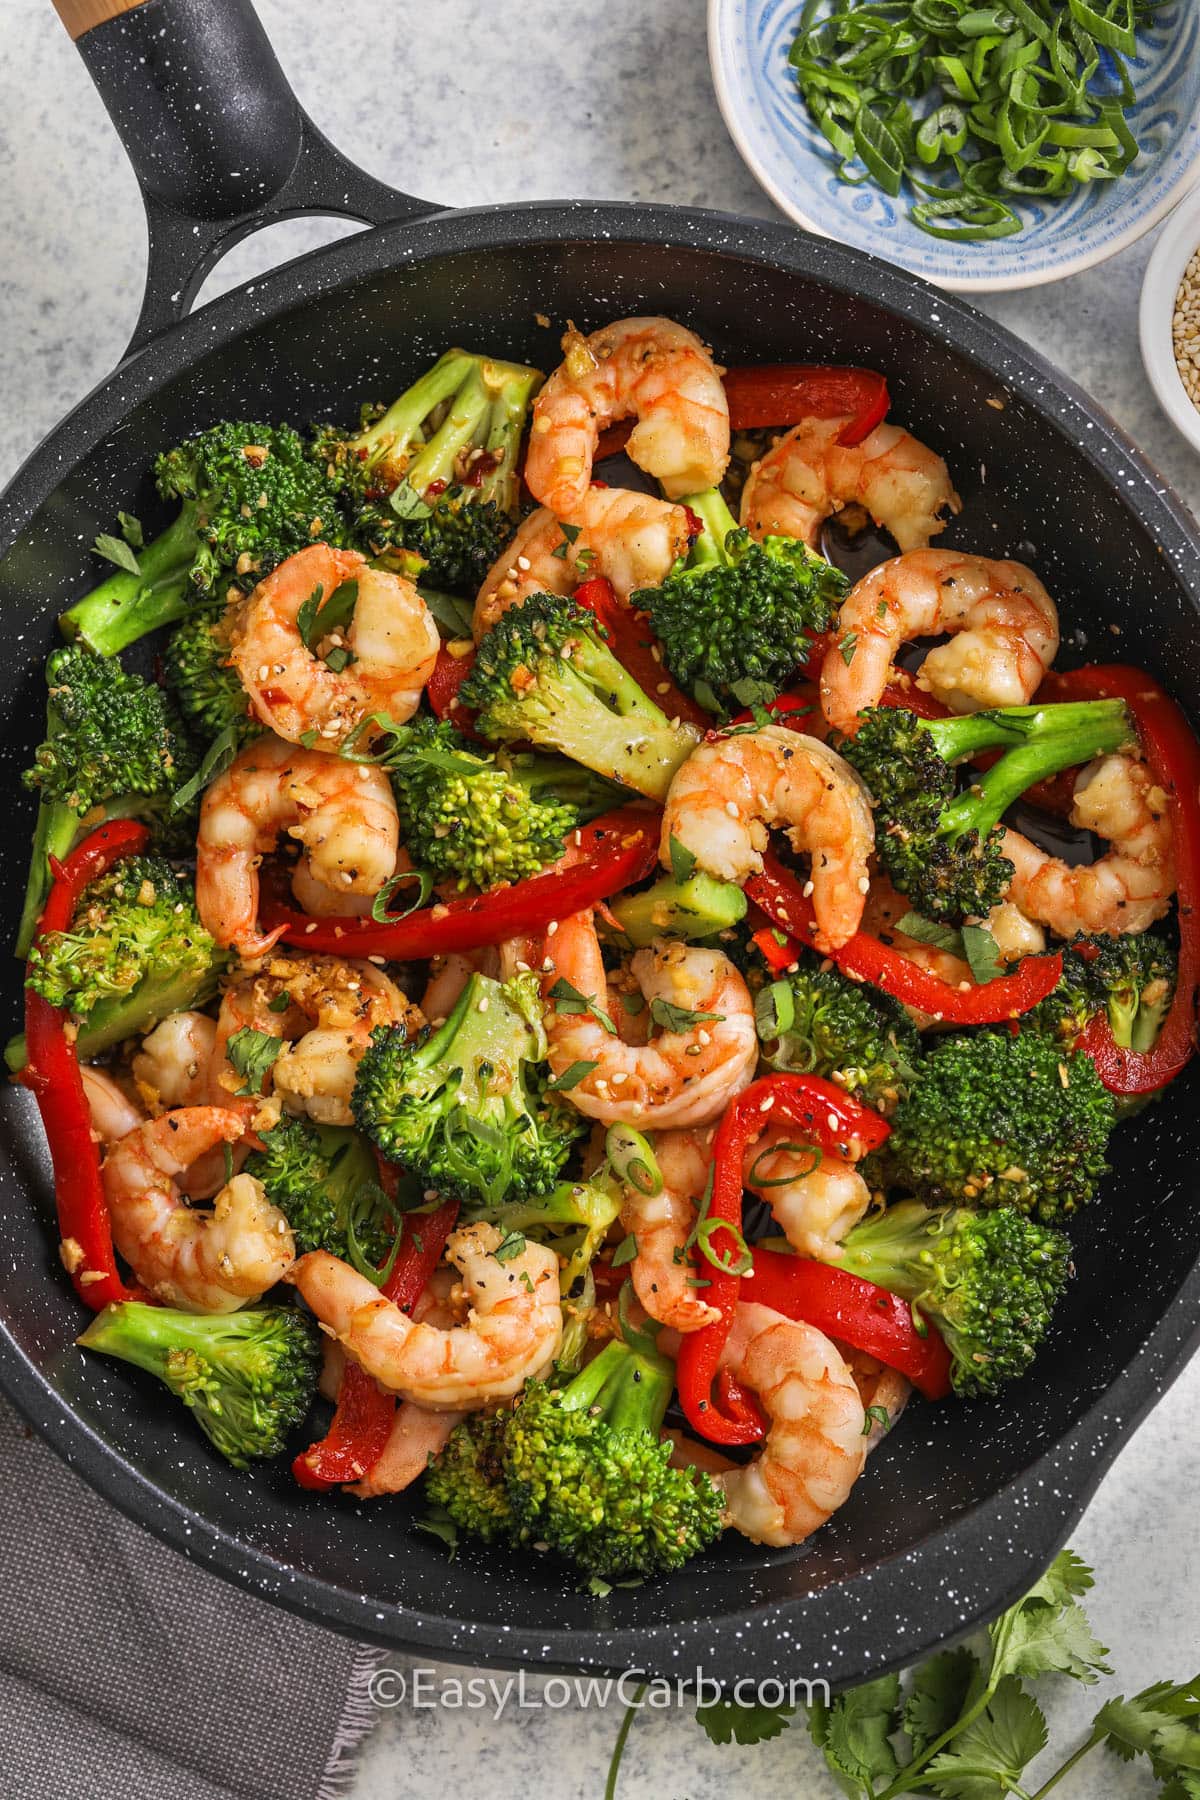 Shrimp and Broccoli Recipe (Quick & Easy Dinner!) - Easy Low Carb